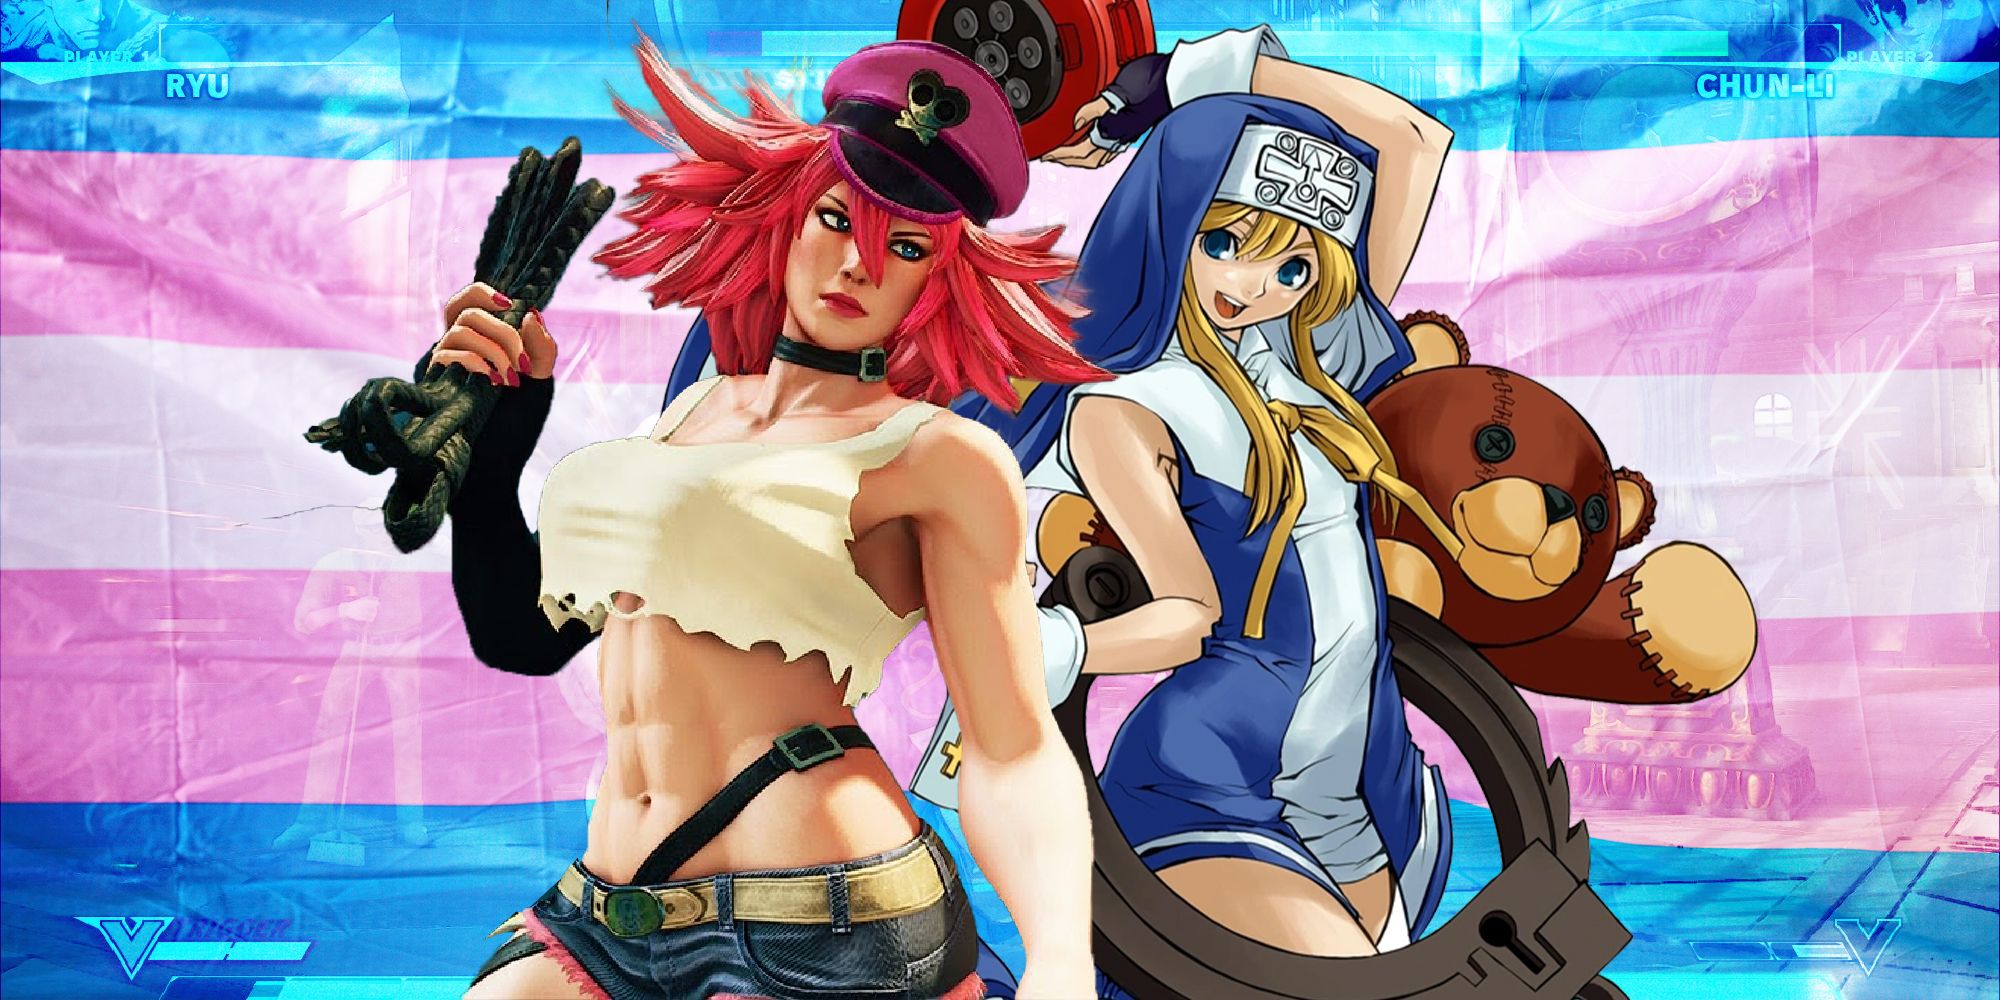 Poison and Bridget from Street Fighter and Guilty Gear